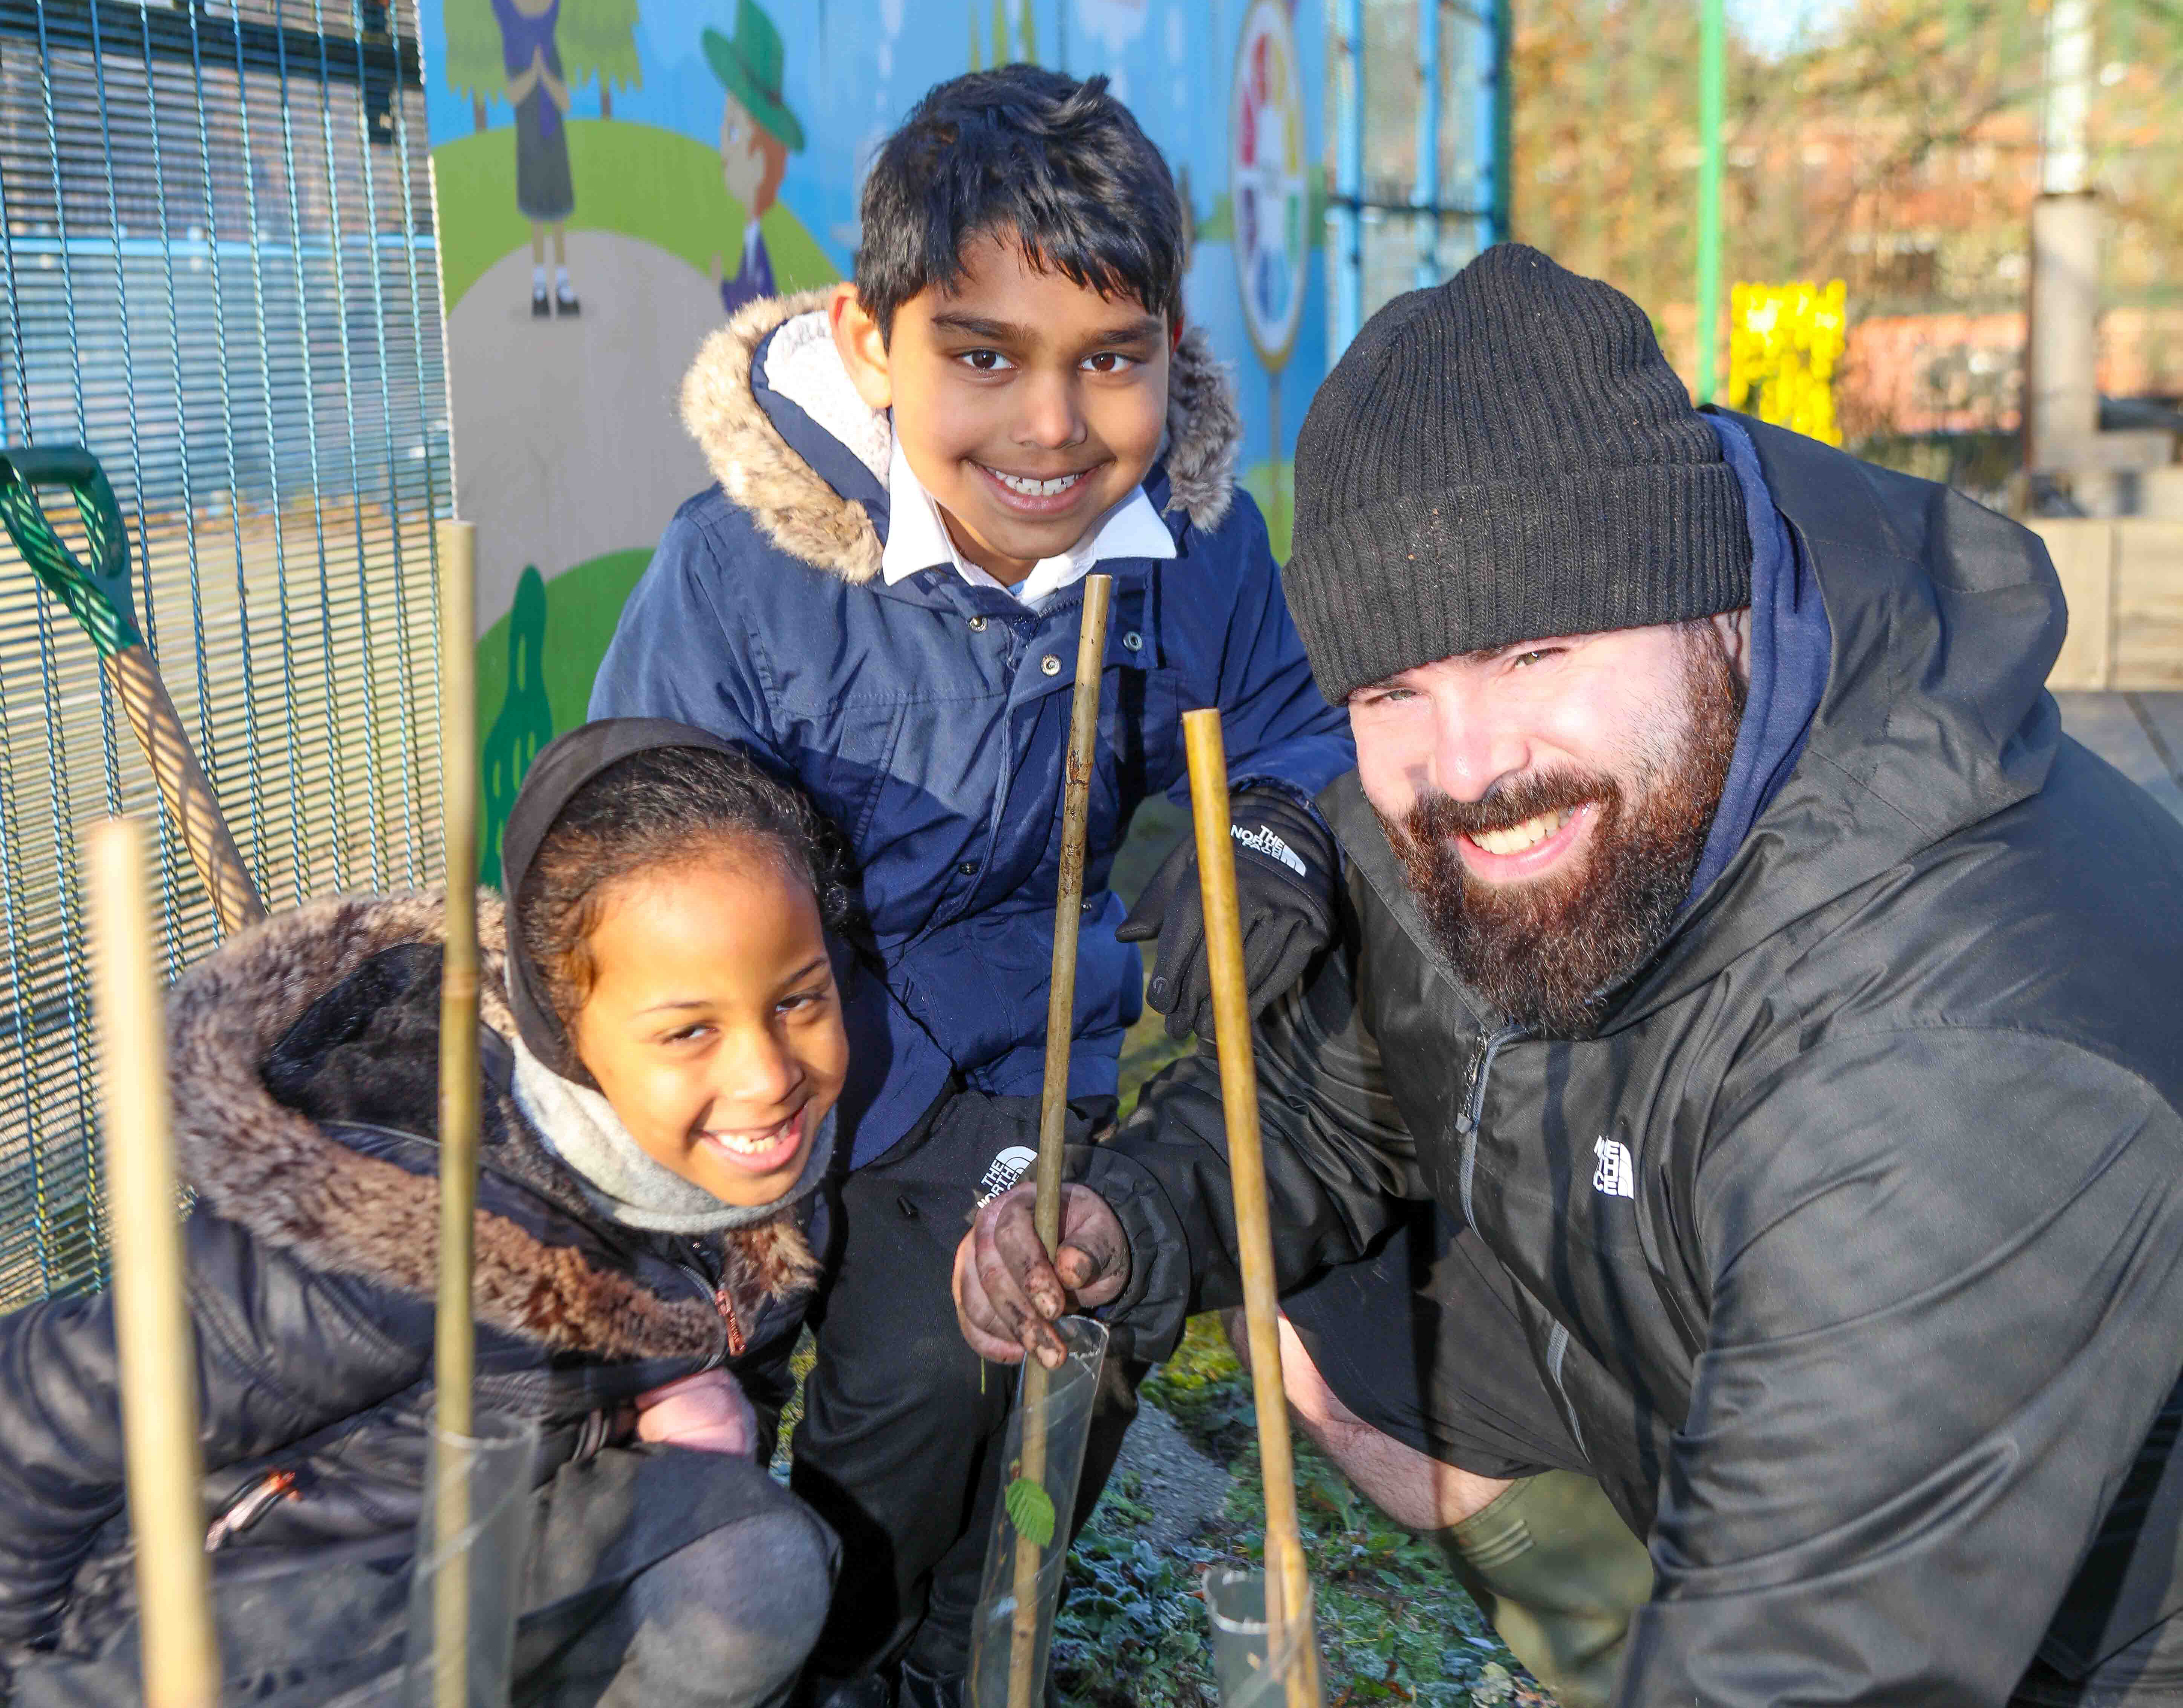 Intercity Technology planting event at Pikes Lane Primary School